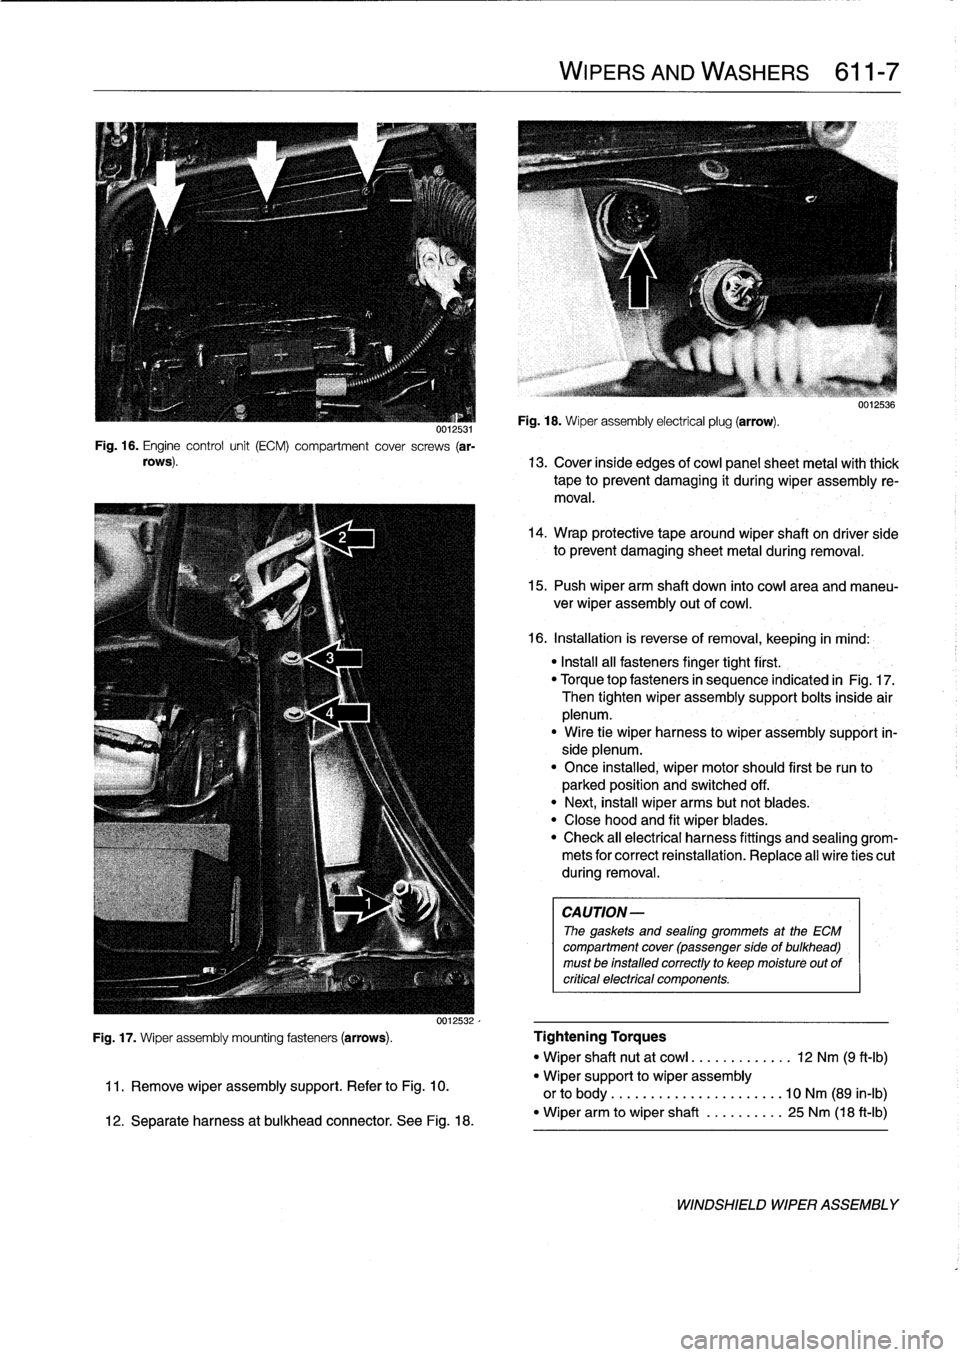 BMW 323i 1995 E36 Workshop Manual 
0012531Fig
.
16
.
Engine
control
unit
(ECM)
compartment
cover
screws
(ar-
rows)
.

WIPERS
AND
WASHERS

	

611-
7

Fig
.
18
.
Wiper
assembly
electrical
plug
(arrow)
.

uu1zbs6

13
.
Cover
inside
edges